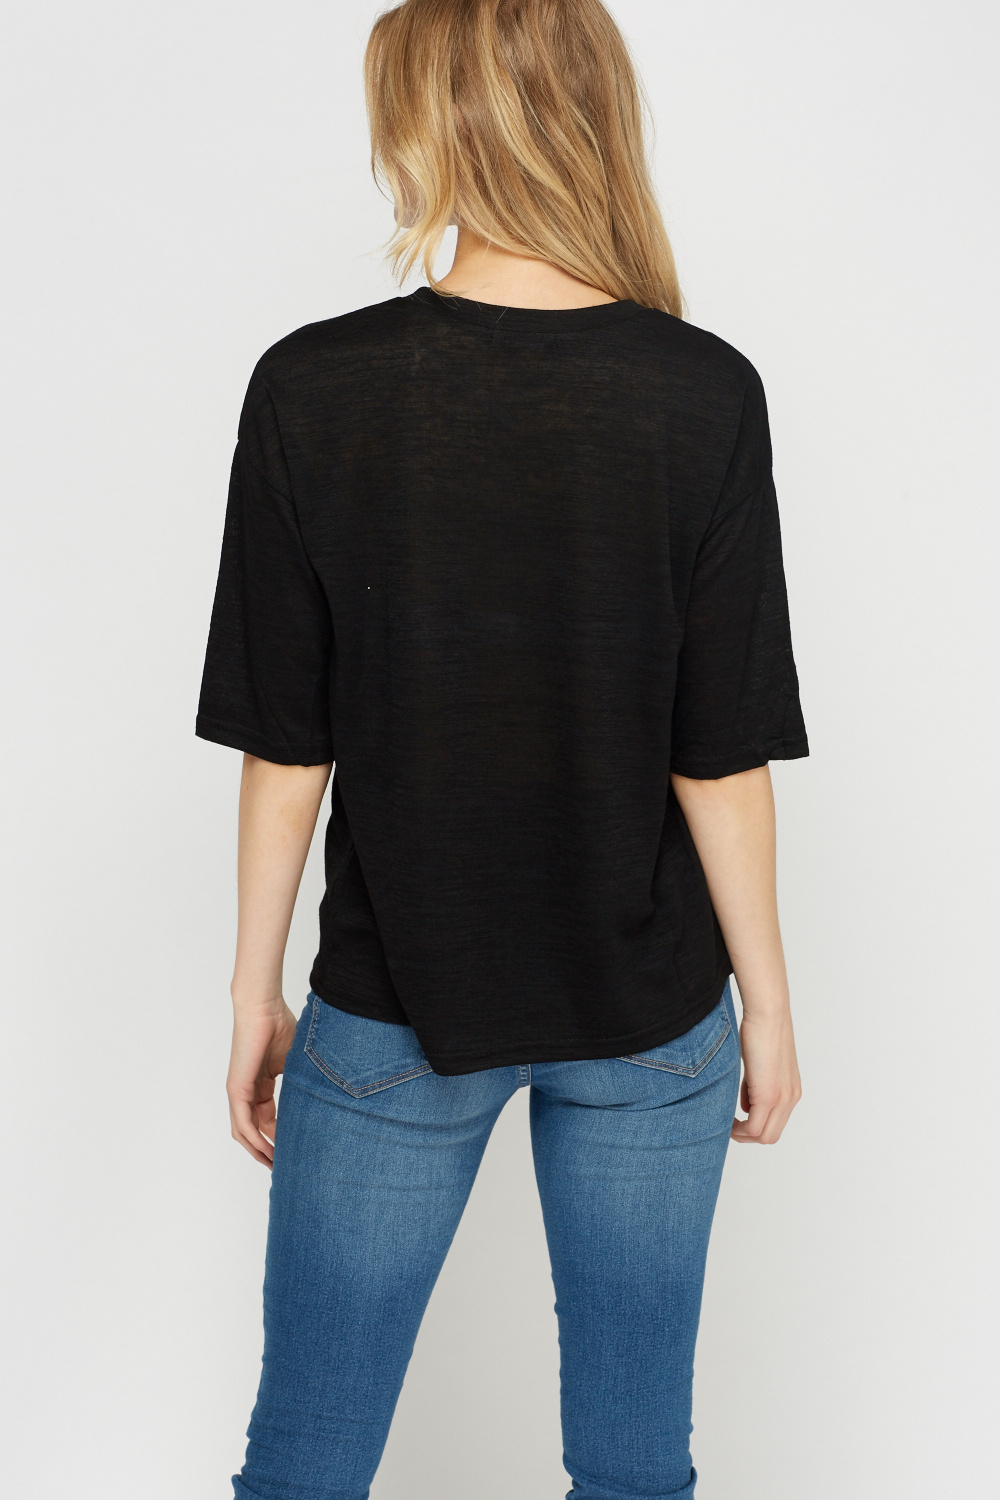 Cut Out Stitched T-Shirt - Just $3